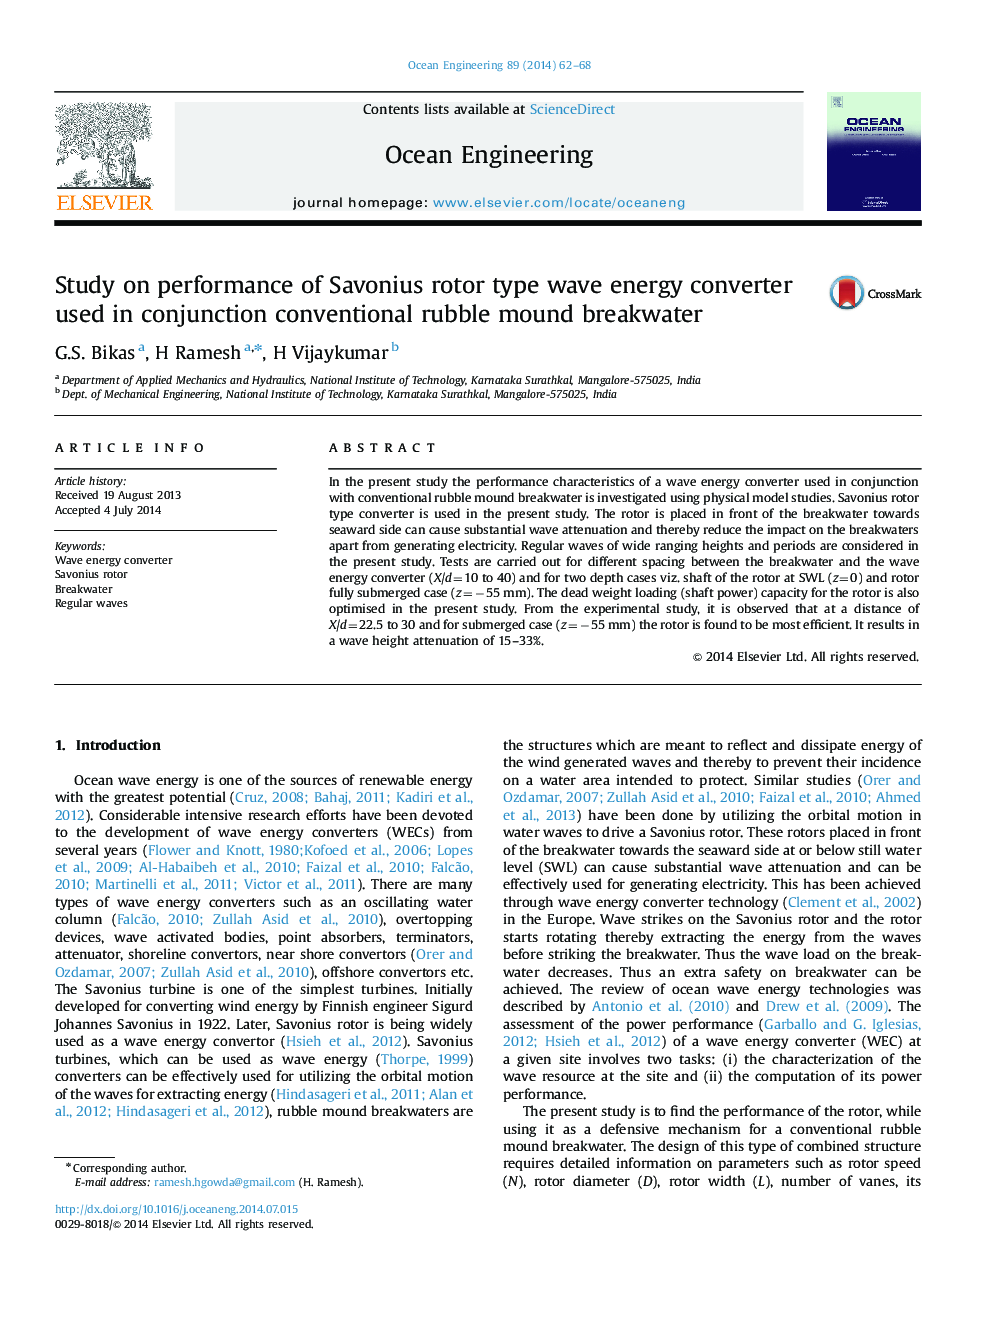 Study on performance of Savonius rotor type wave energy converter used in conjunction conventional rubble mound breakwater